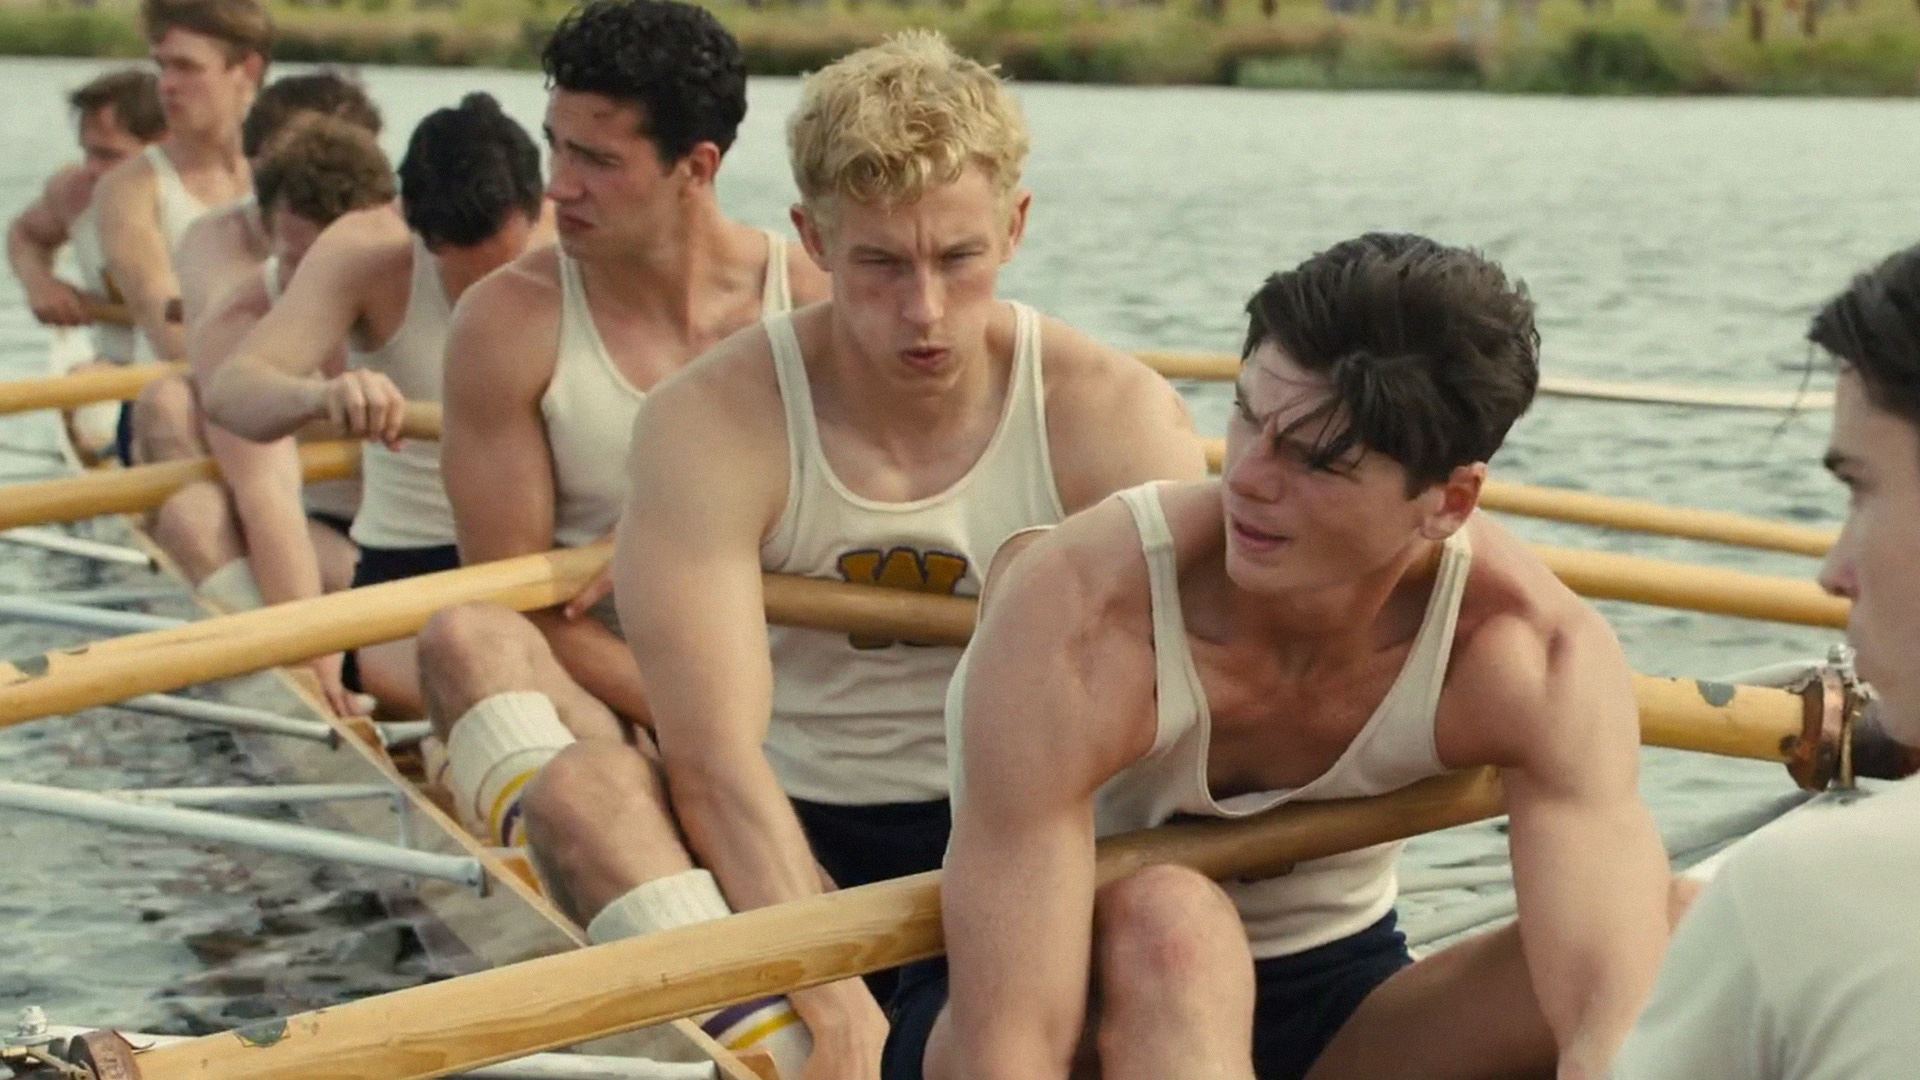 The Boys In the Boat: A Triumph Of Teamwork And Tenacity